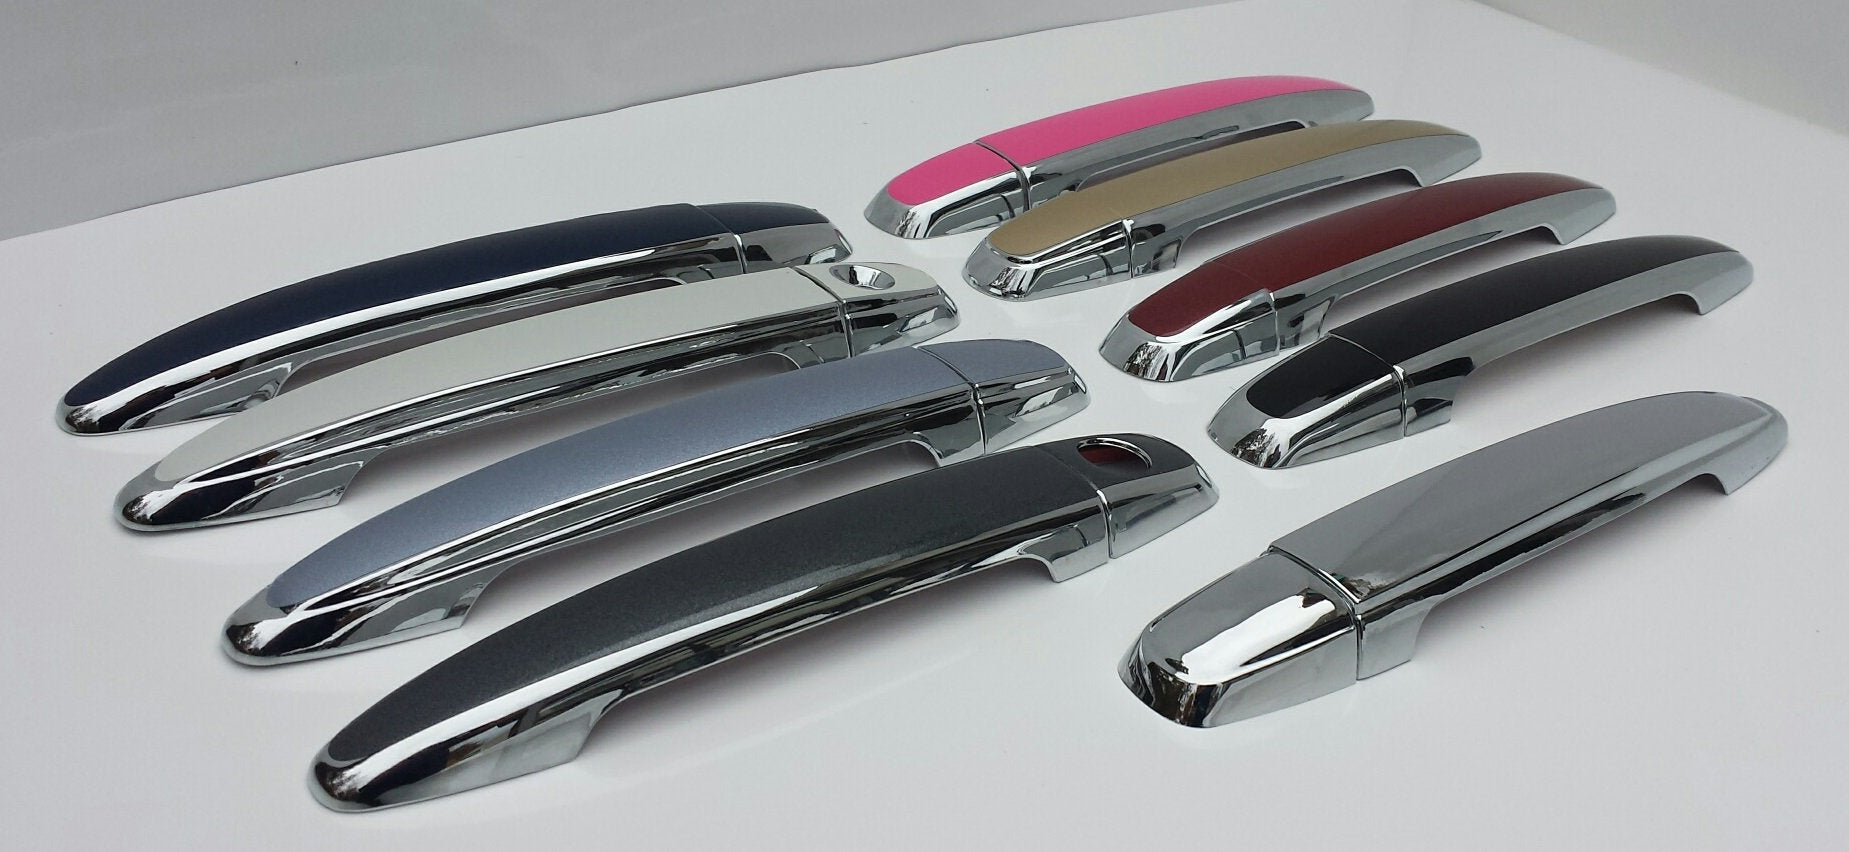 Full Set of Custom Black OR Chrome Door Handle Overlays / Covers For 2006 - 2011 Toyota Avalon - You Choose the Color of the Middle Insert